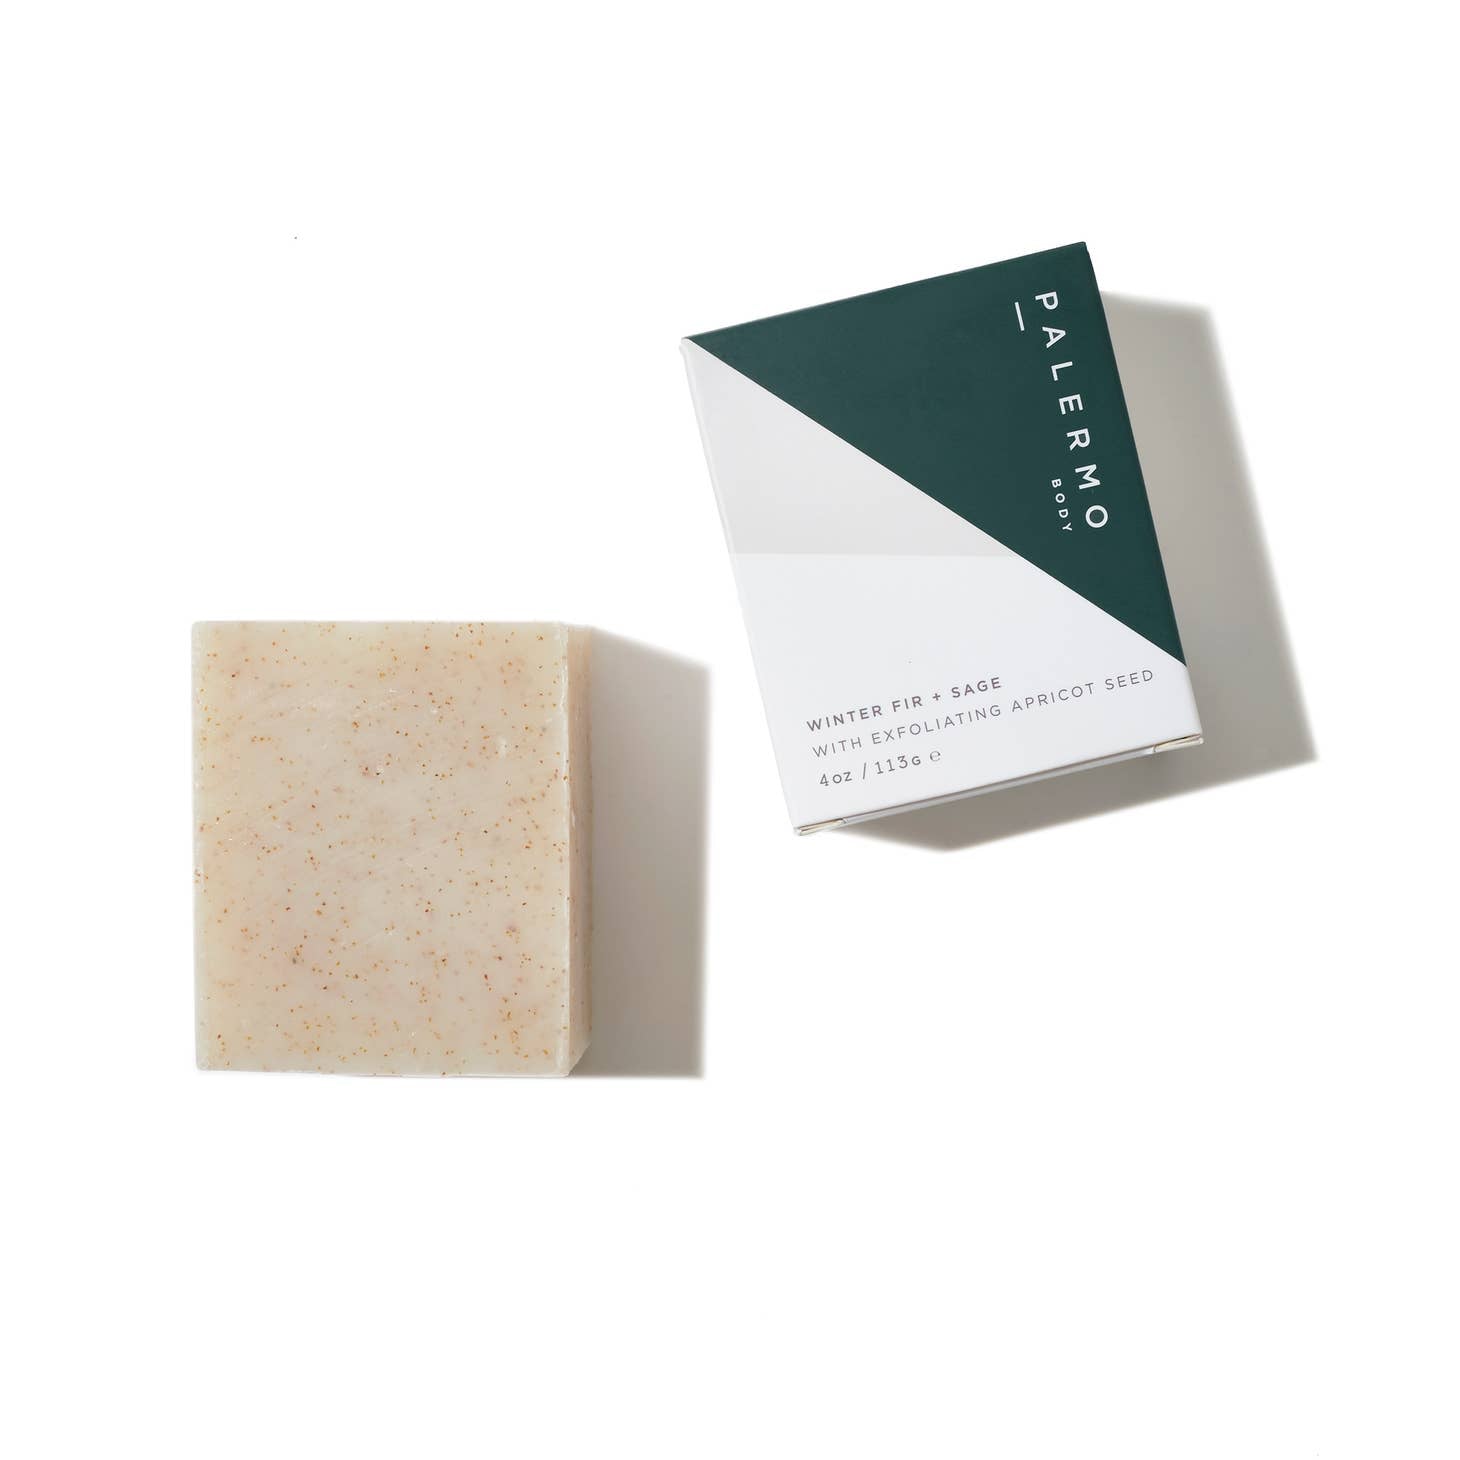 Palermo's Winter Fir + Sage soap bar, shown next to its packaging.